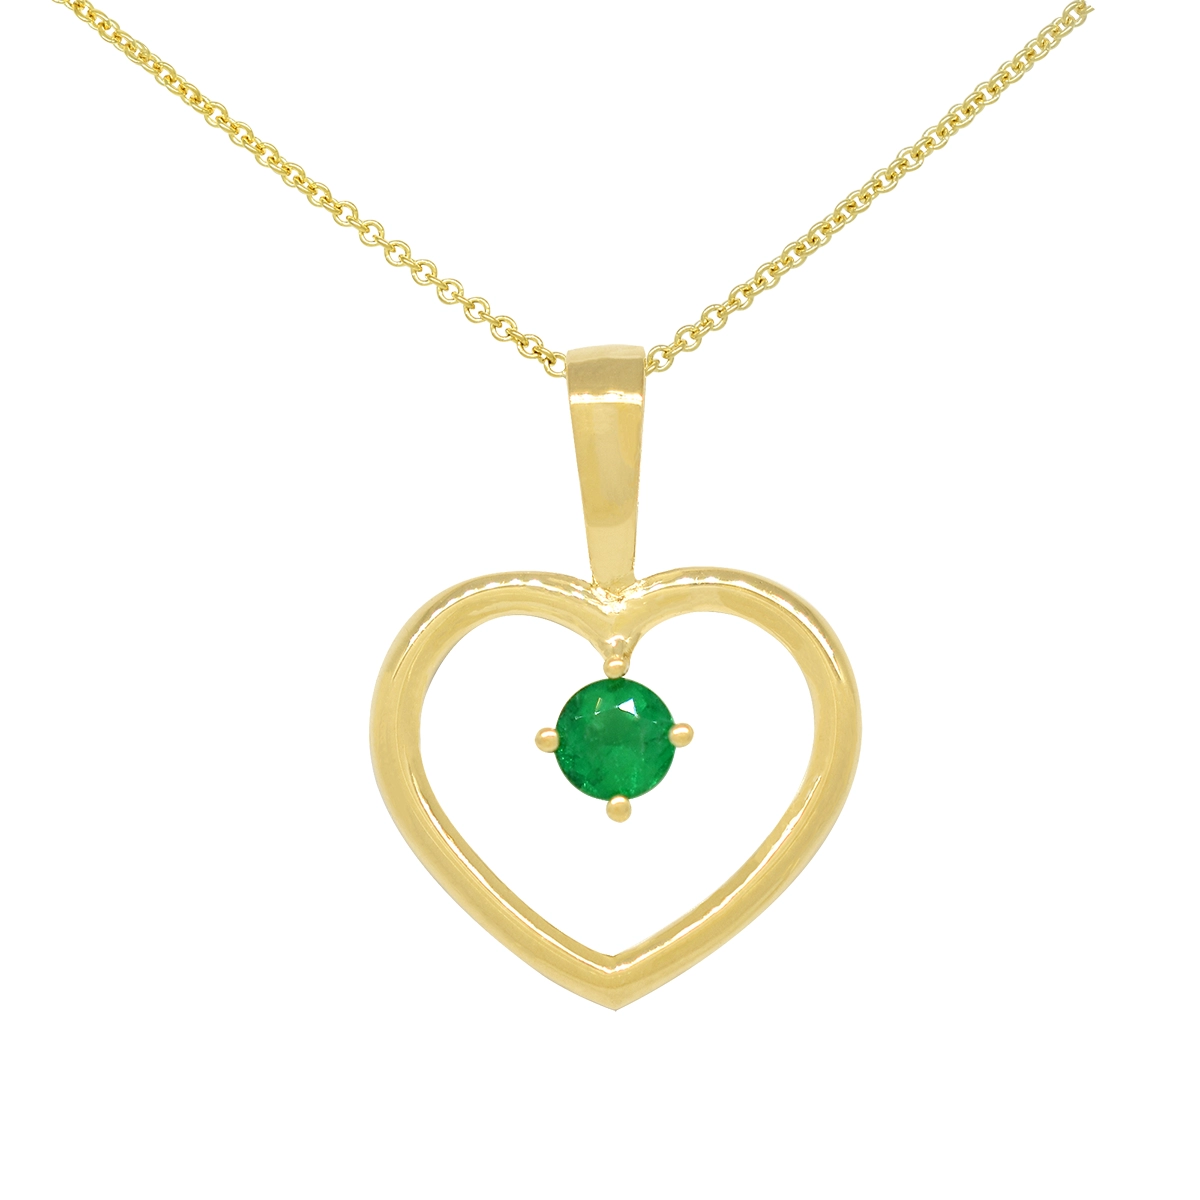 18K Gold Heart Shape Emerald Pendant with 0.22 Ct. Round Cut Emerald